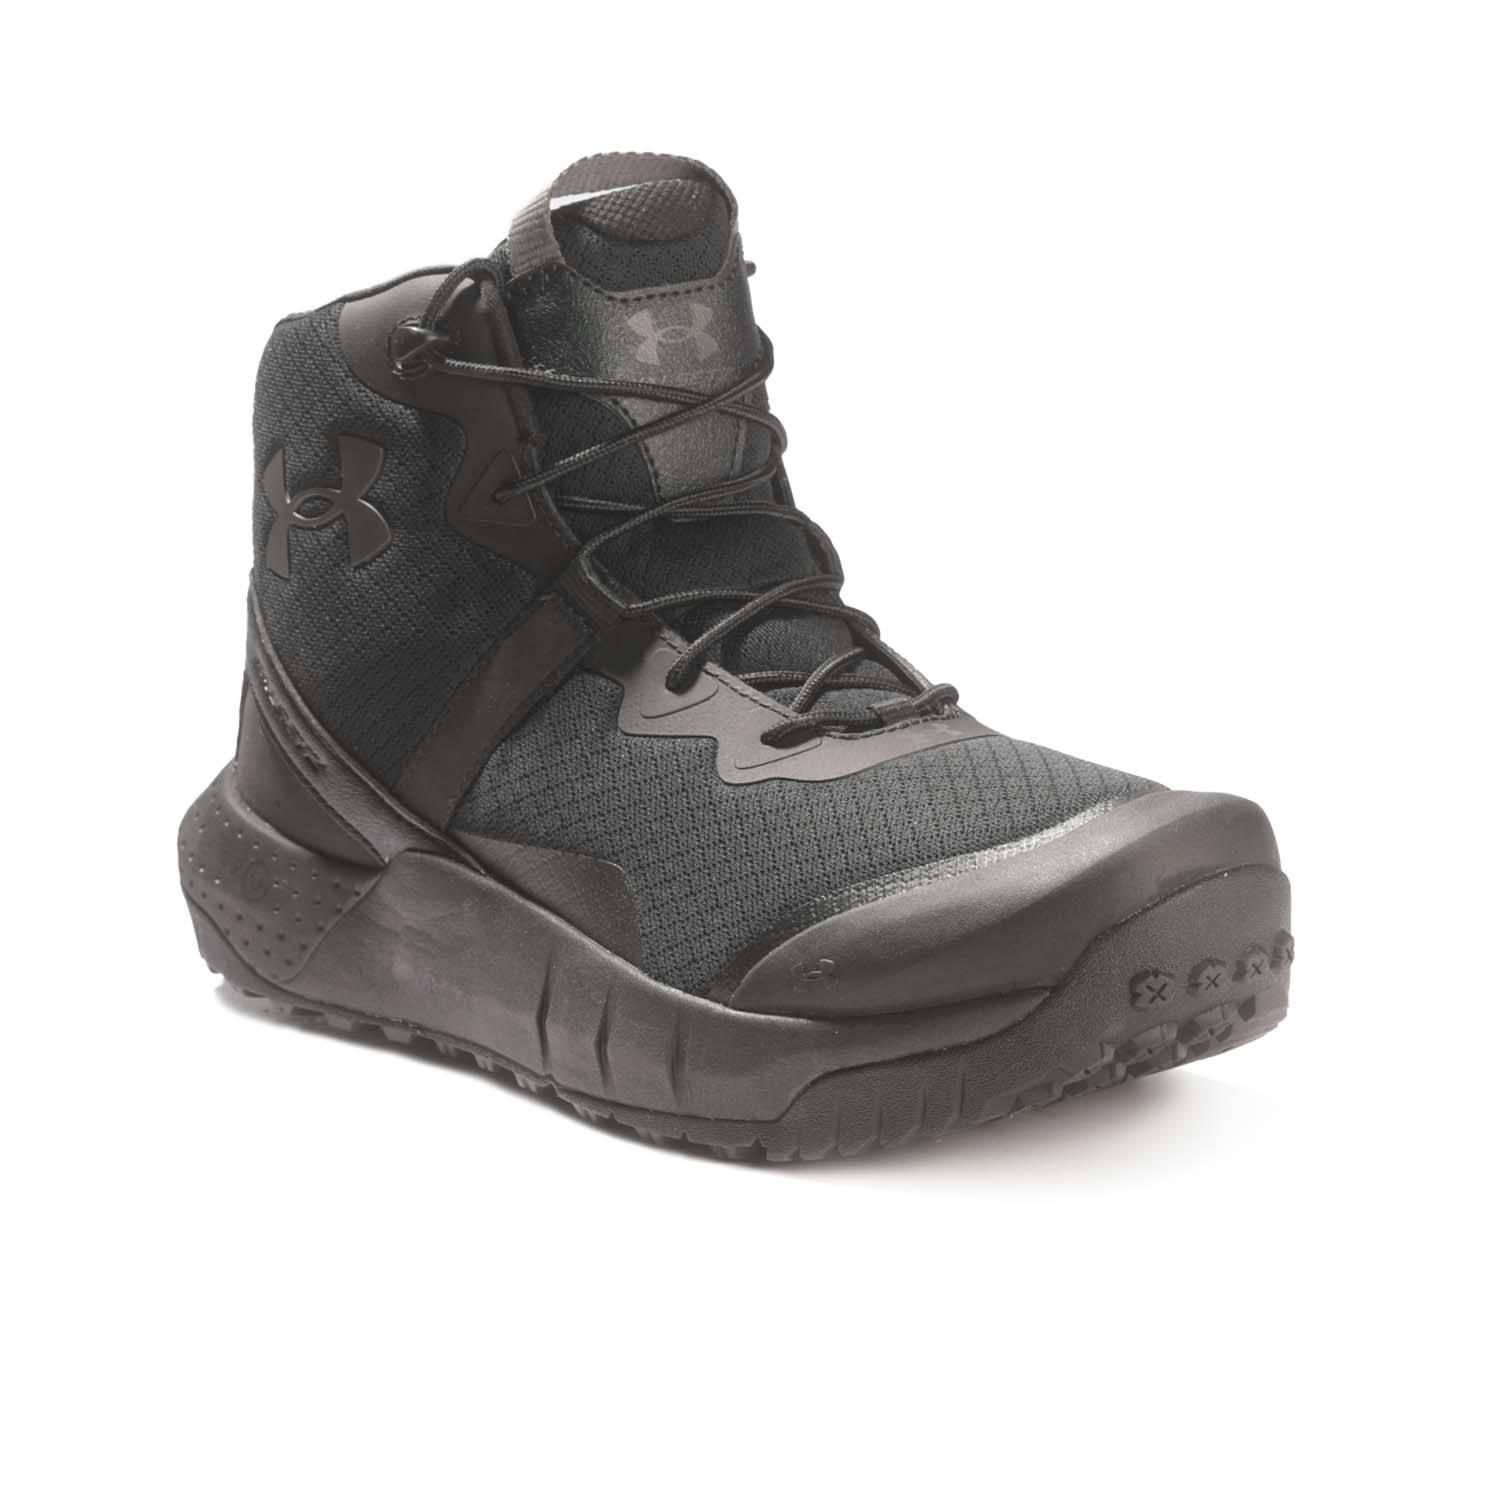 Under Armour Micro G Valsetz Mid Side Zip Review (Under Armour Tactical  Boots Review) 